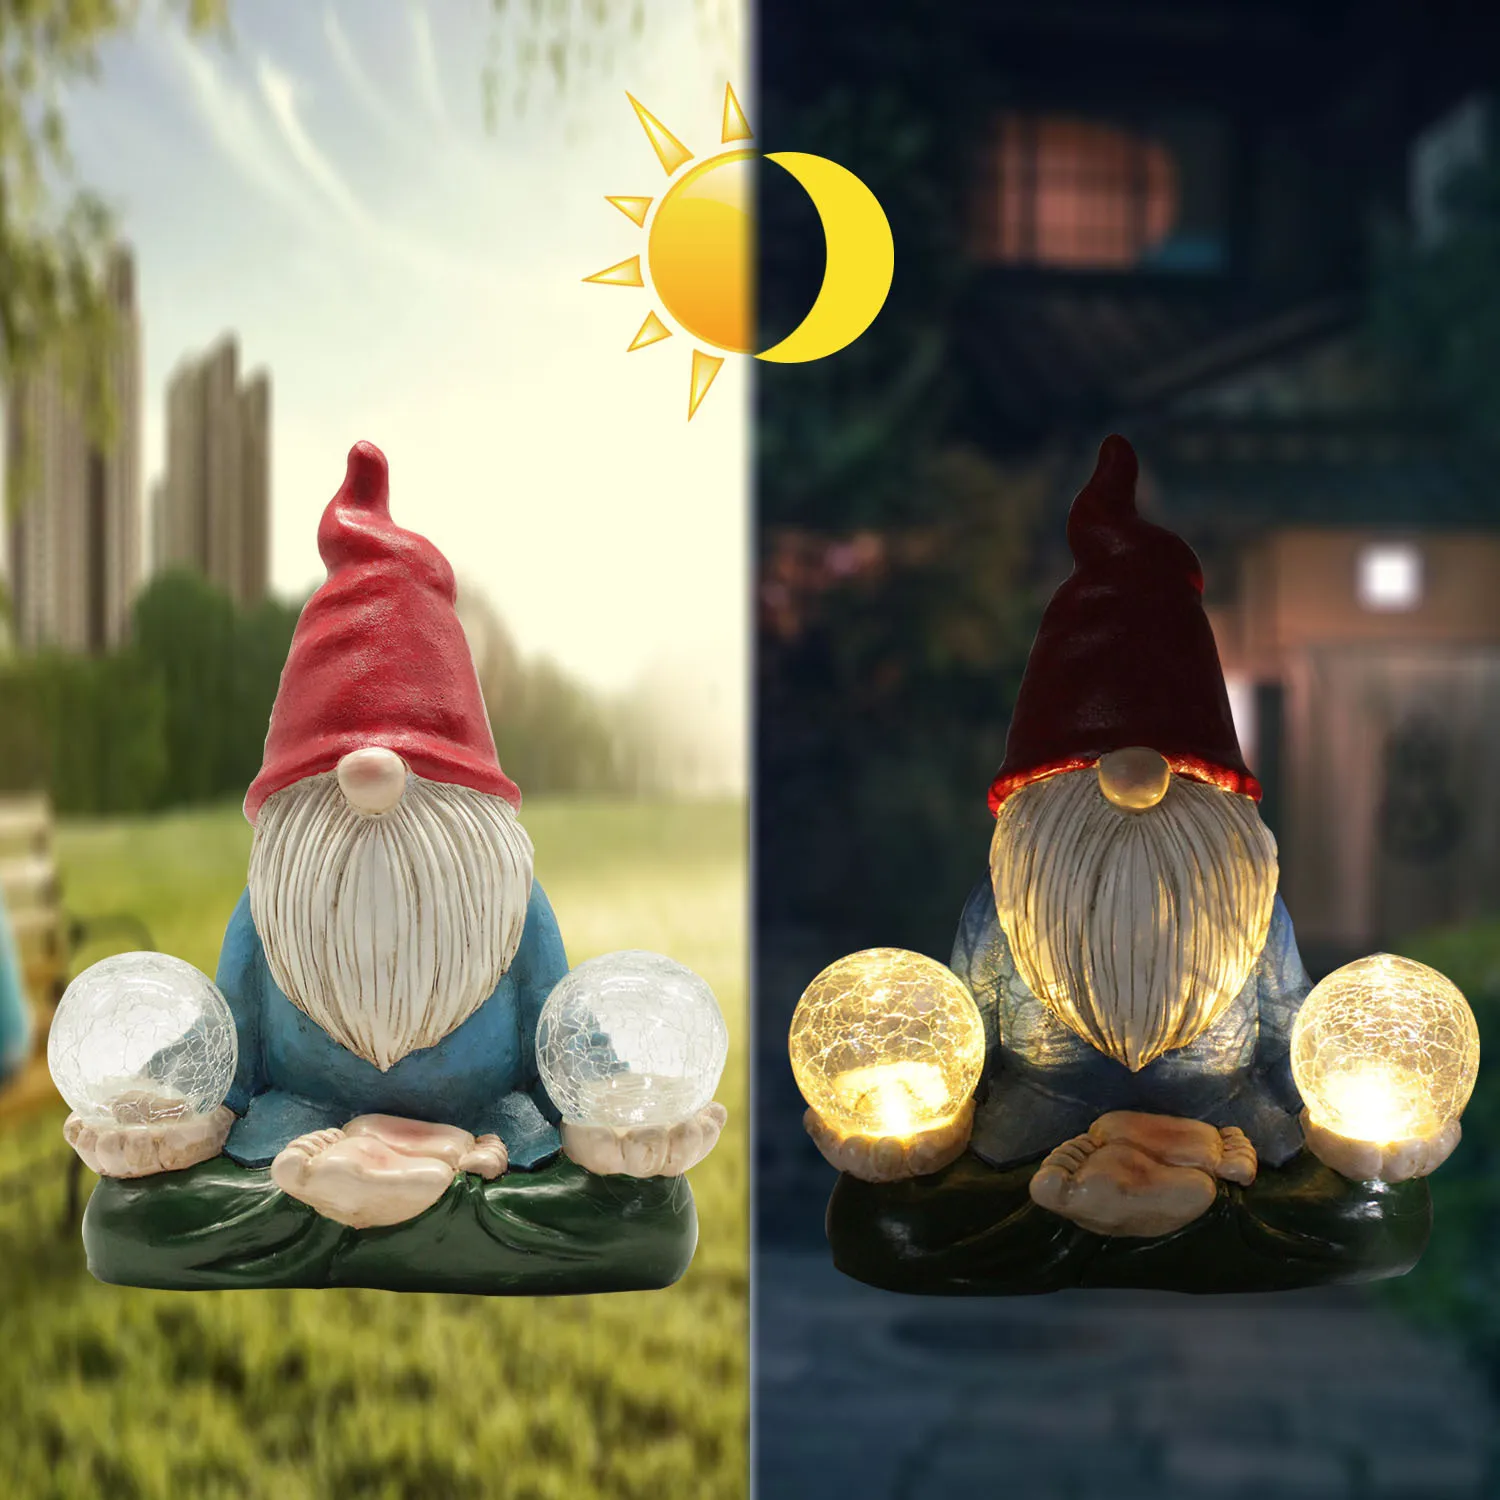 
wholesale custom resin led light funny Dwarf figurines large cheap outdoor garden gnomes solar statue 